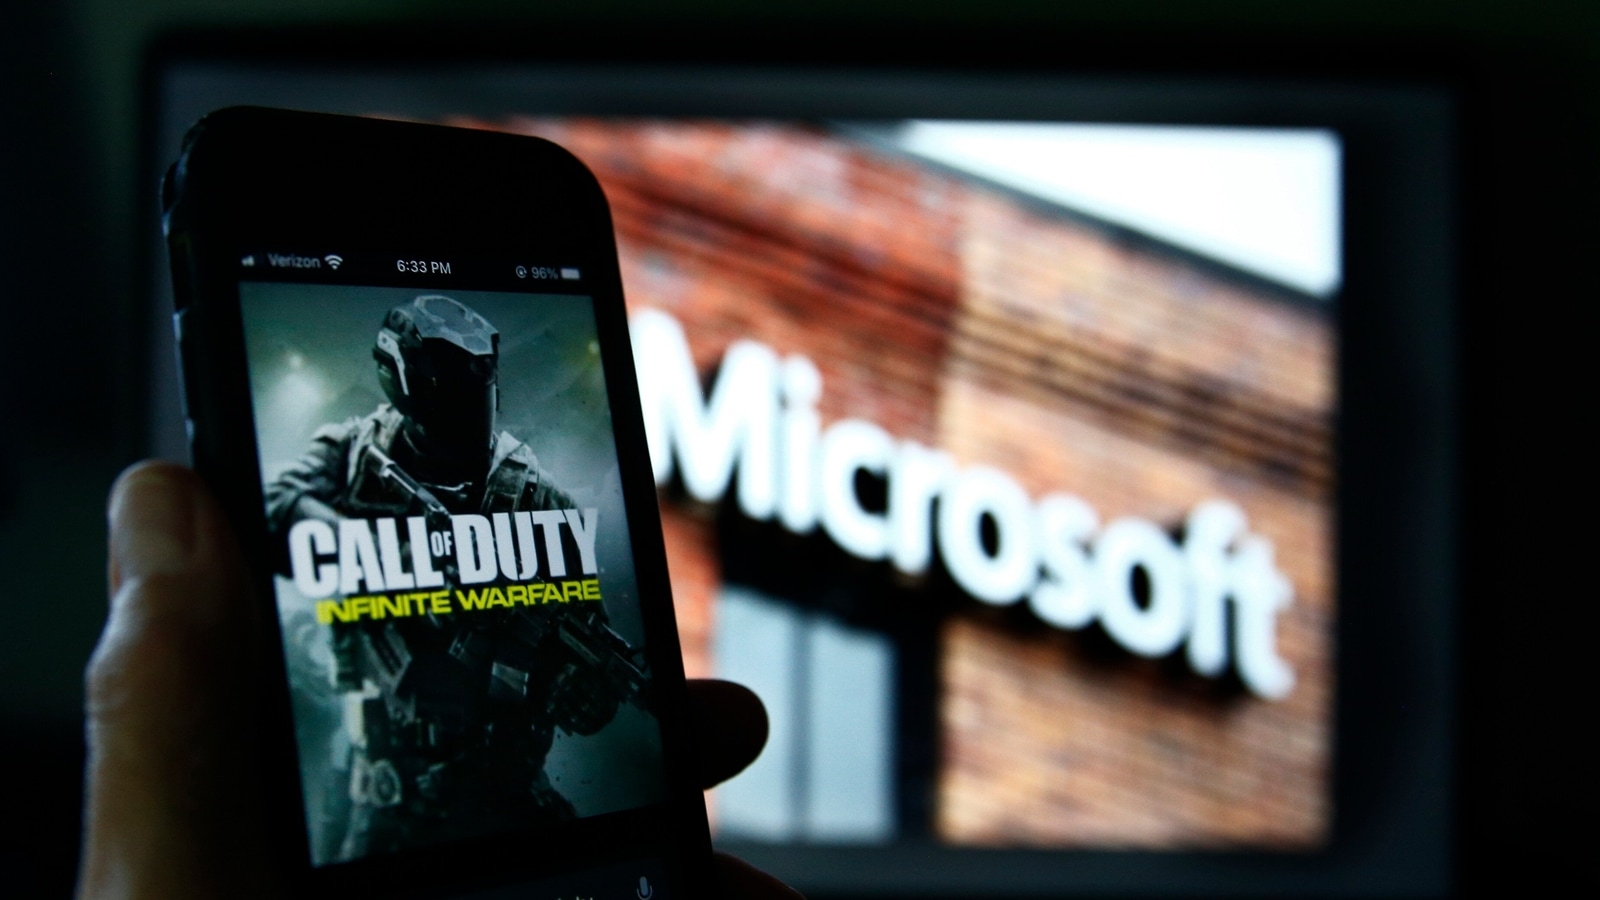 Microsoft nears takeover of ‘Call of Duty’ maker Activision